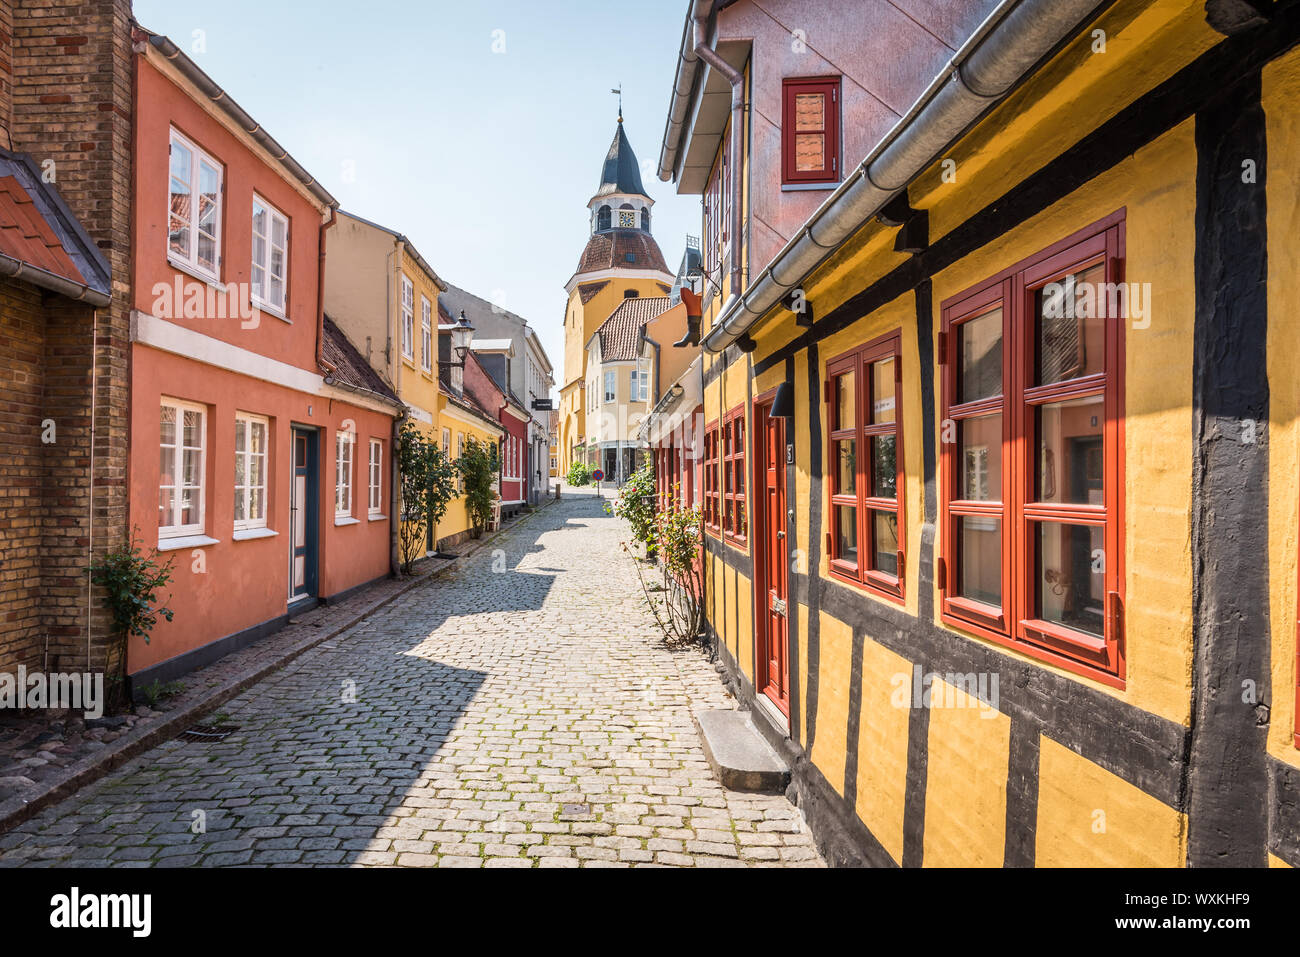 An alleyway with cobblestones and half timbered houses, leading up to the church in Faaborg, Denmark, July 12, 2019 Stock Photo